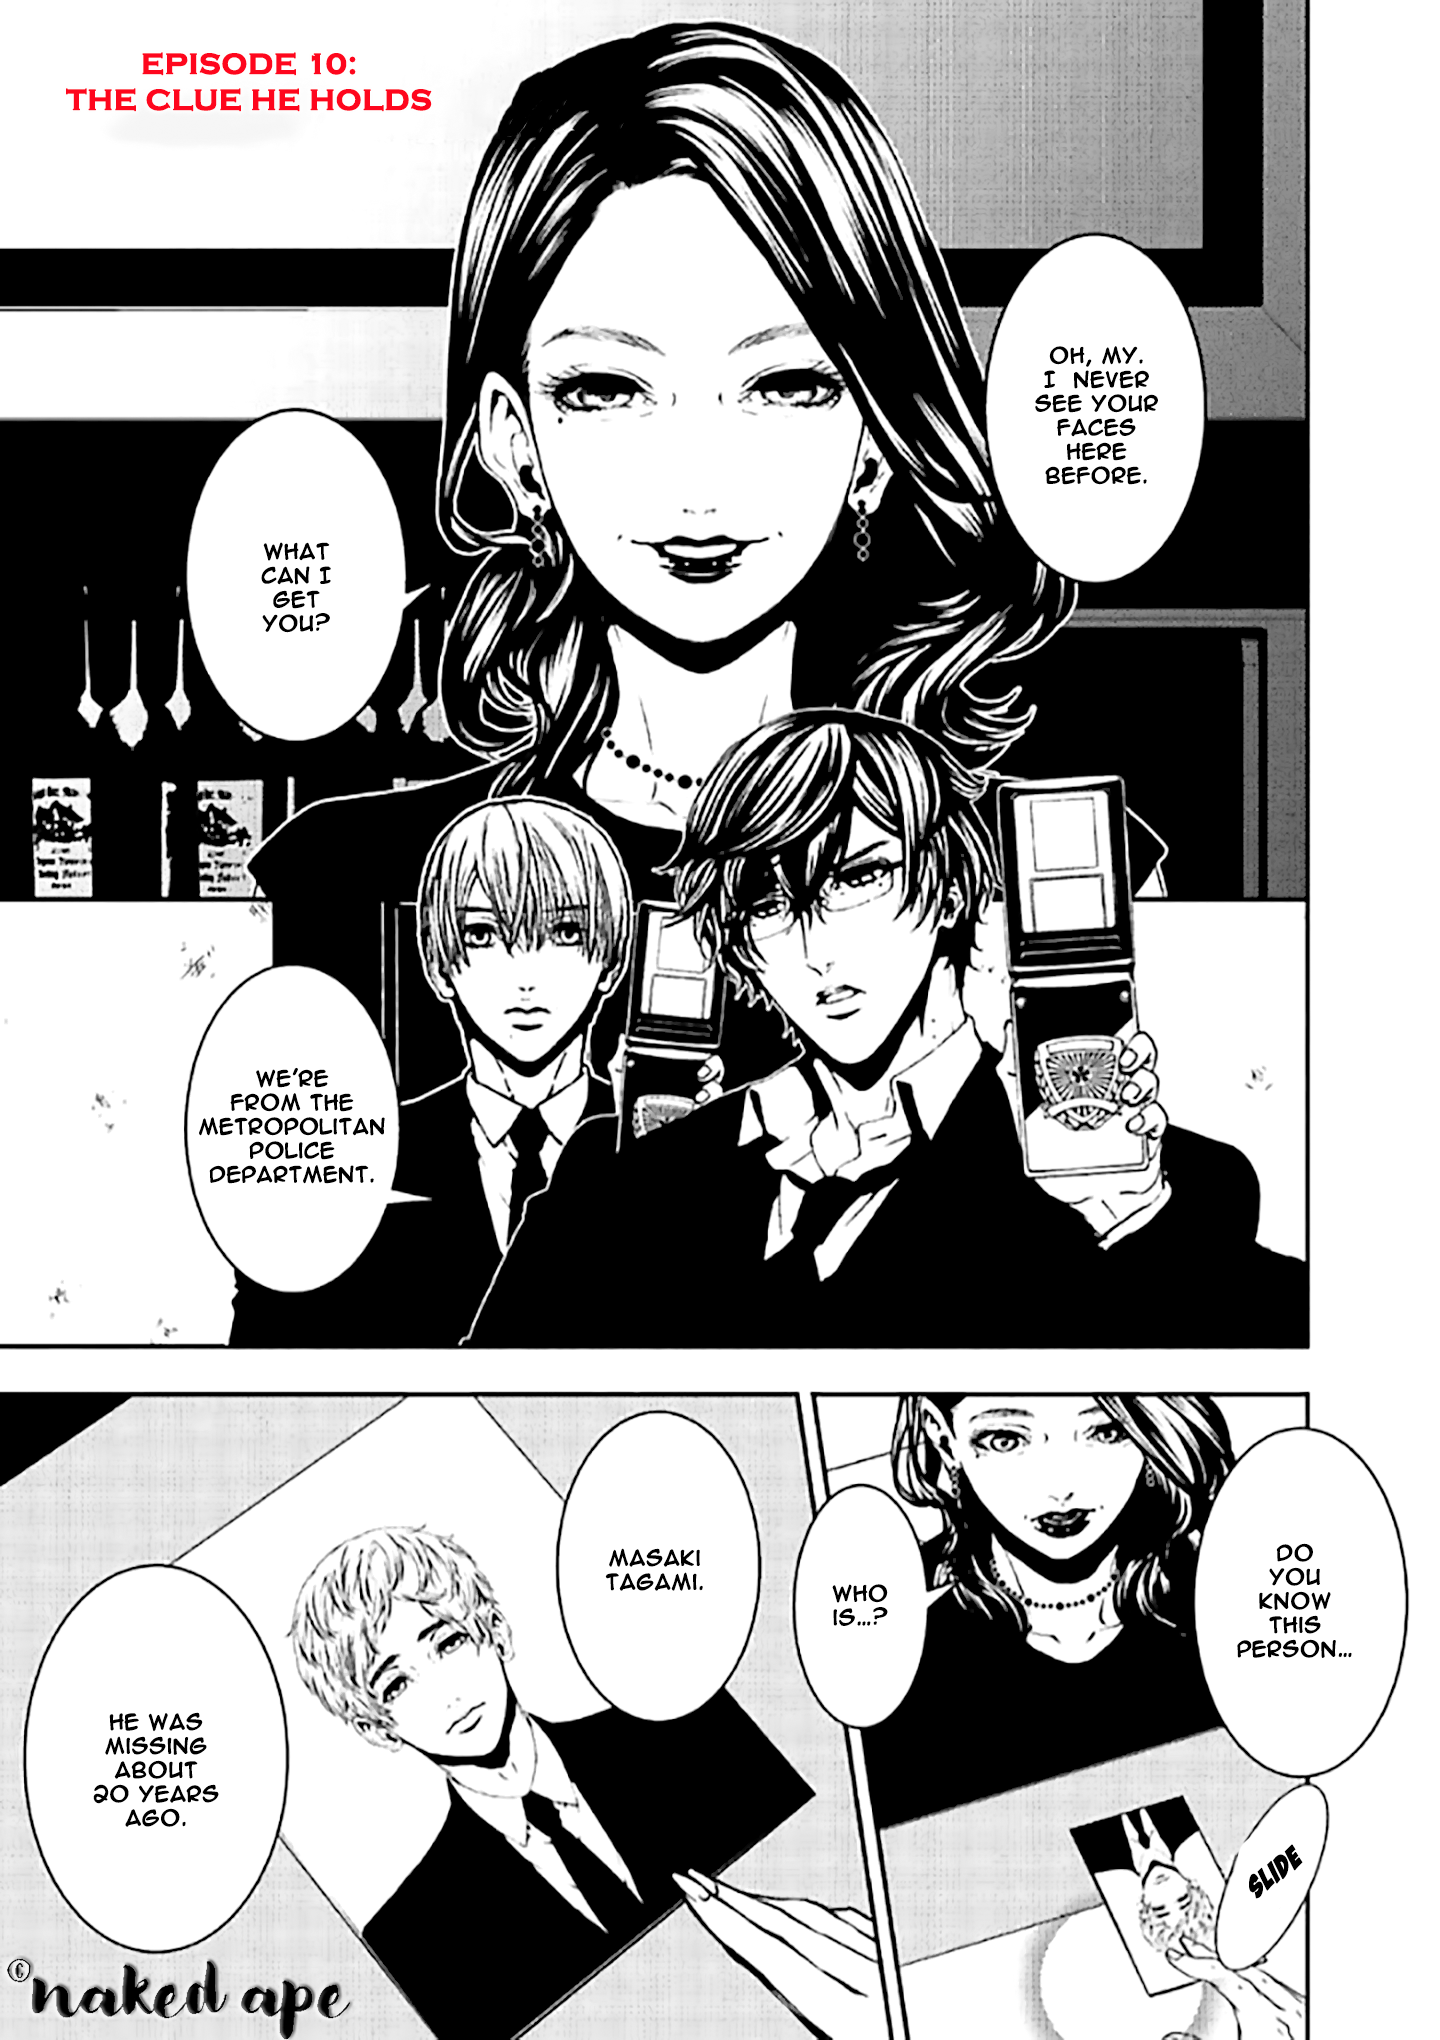 Suicide Line Vol.2 Chapter 10: Episode 10: The Clue He Holds - Picture 1